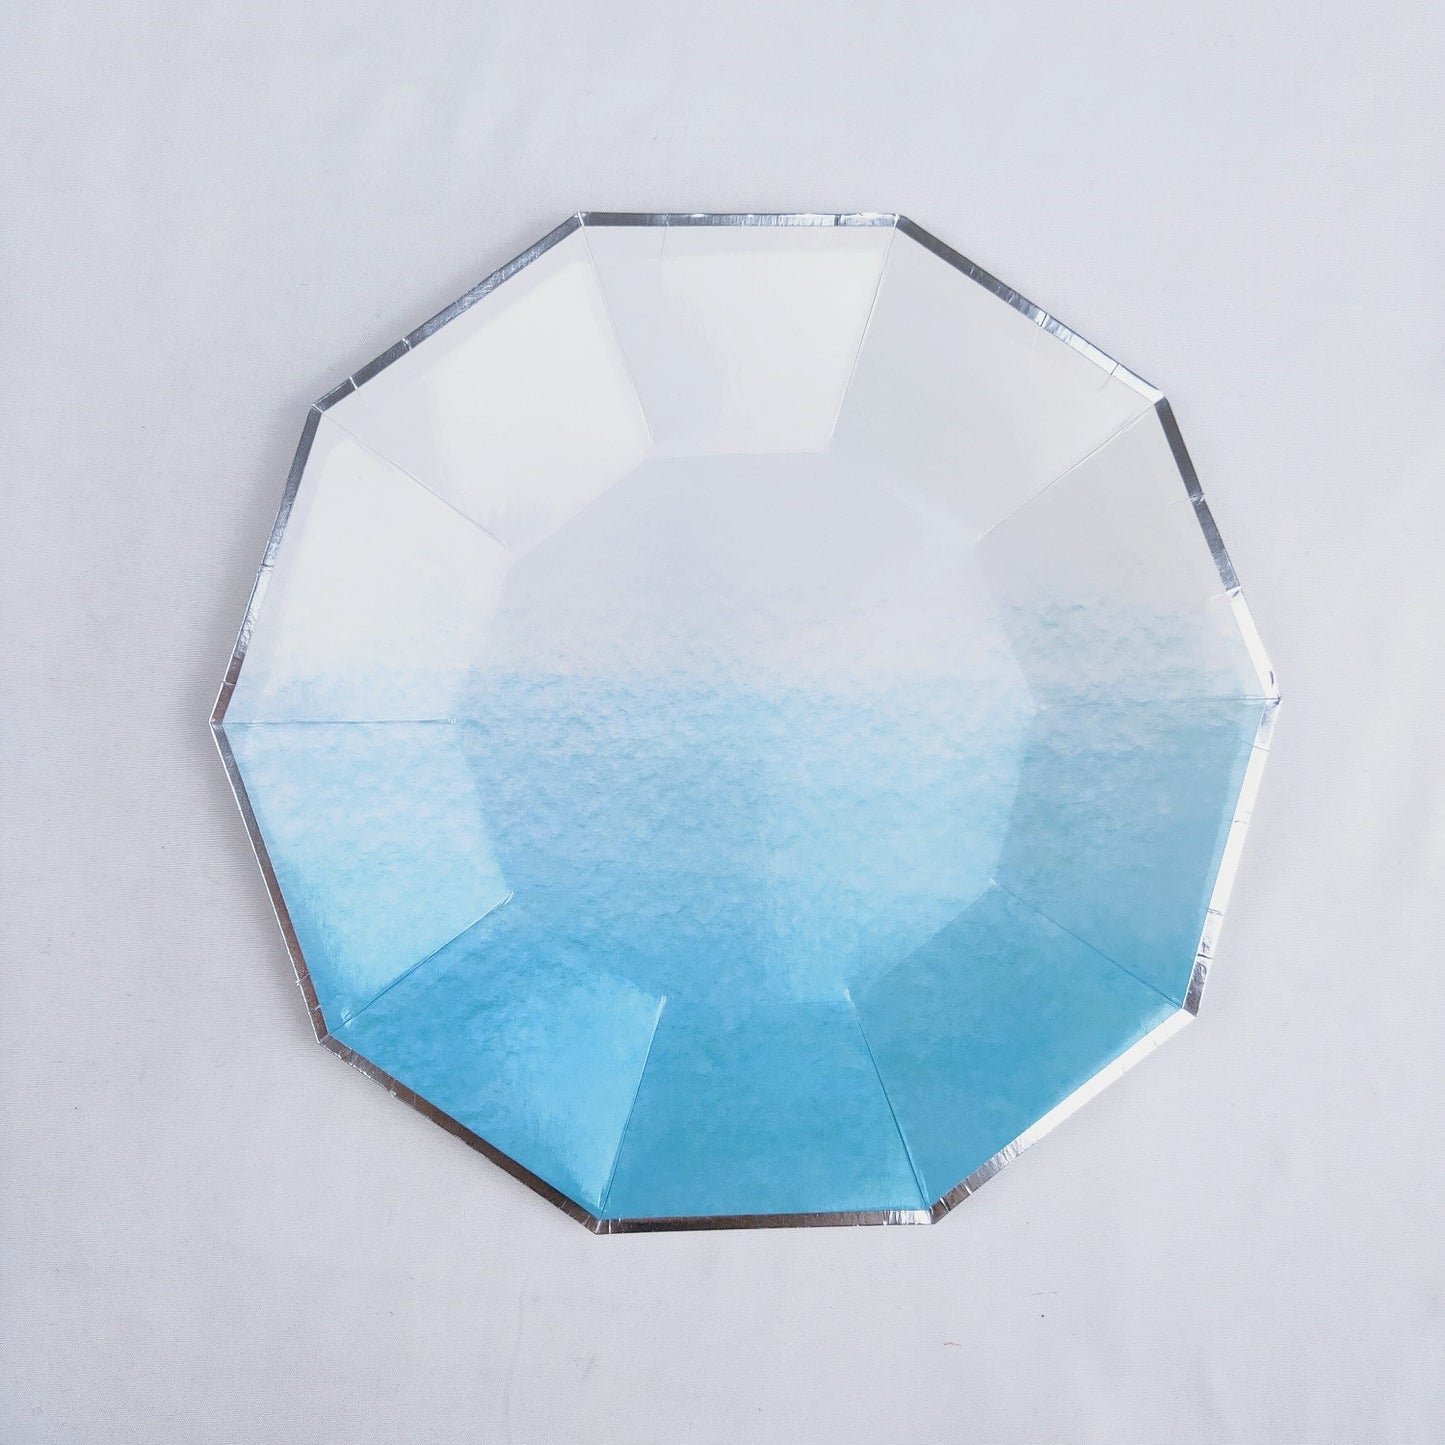 Summer Blue Ocean Party Supplies Decorations Silver Rim Decagon Paper Plates and Cups and Napkins Tableware Sets for 8